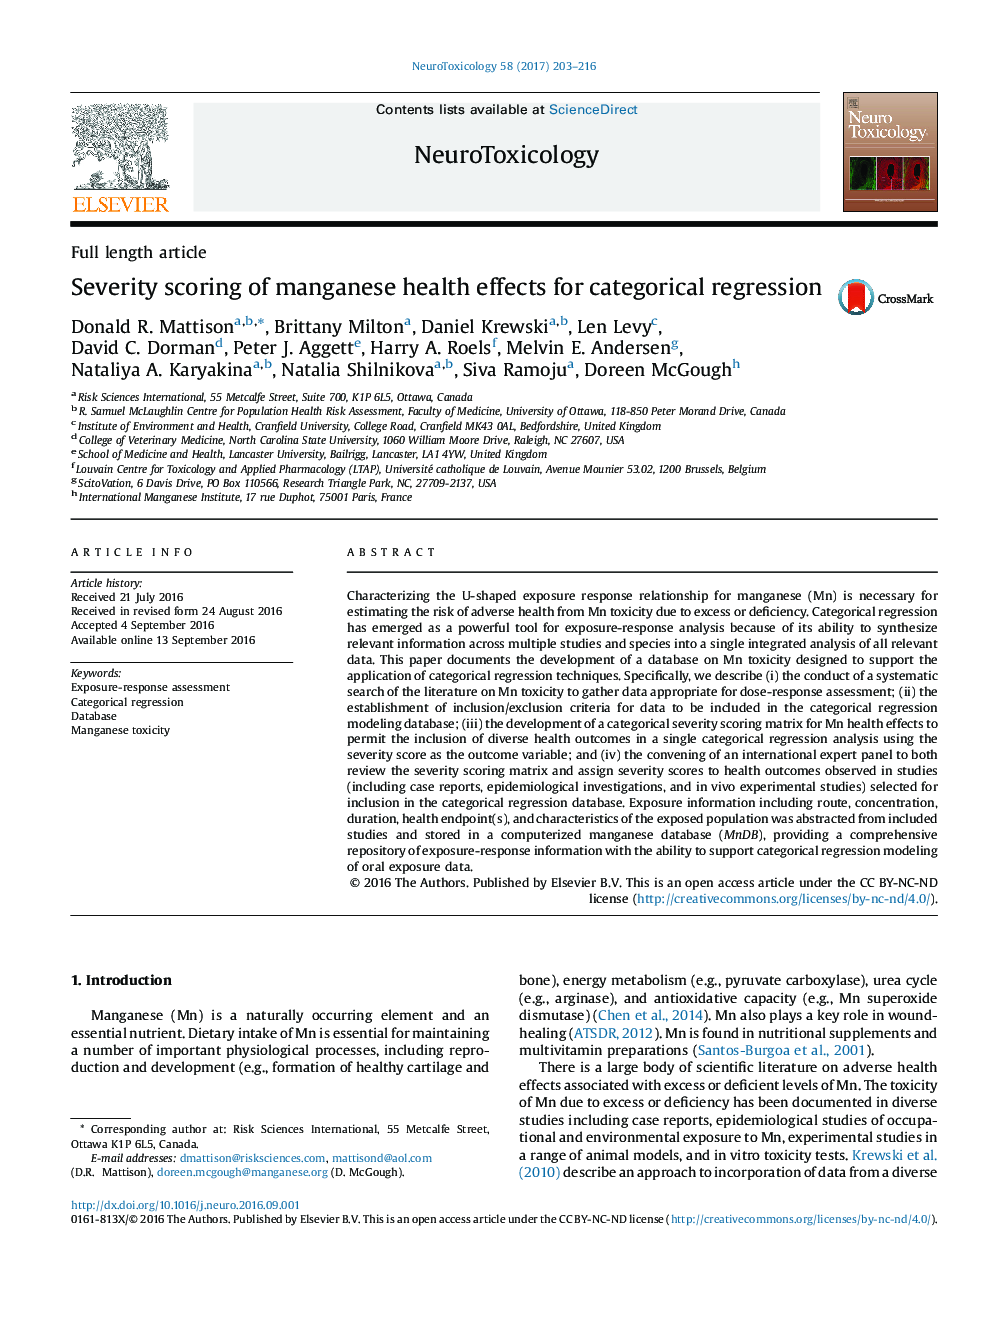 Severity scoring of manganese health effects for categorical regression